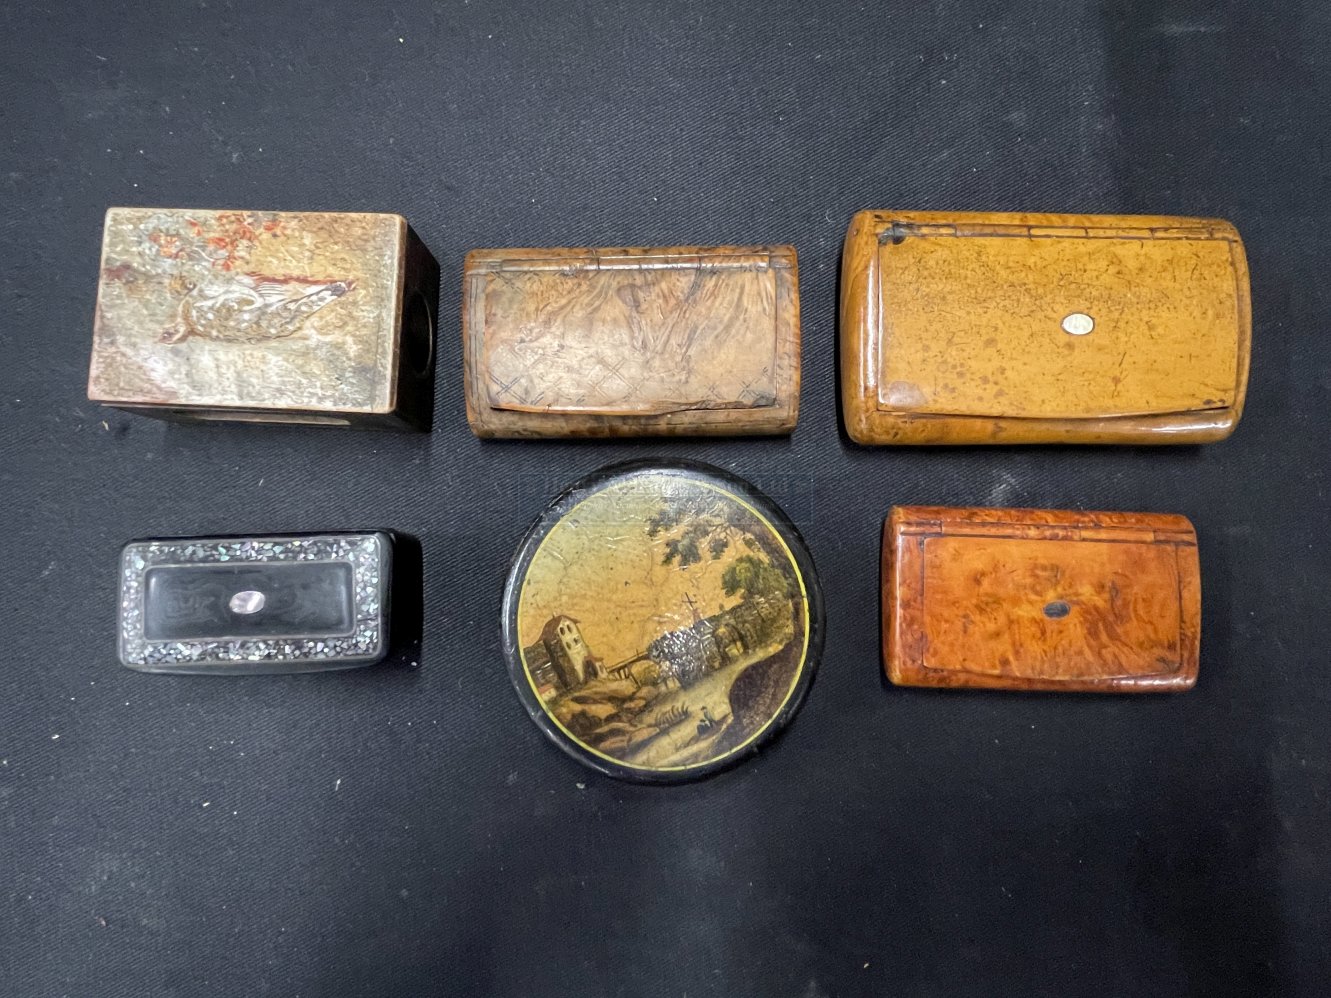 19th cent. Snuff boxes, three treen and two papier mache boxes. (5) Plus matchbox cover.